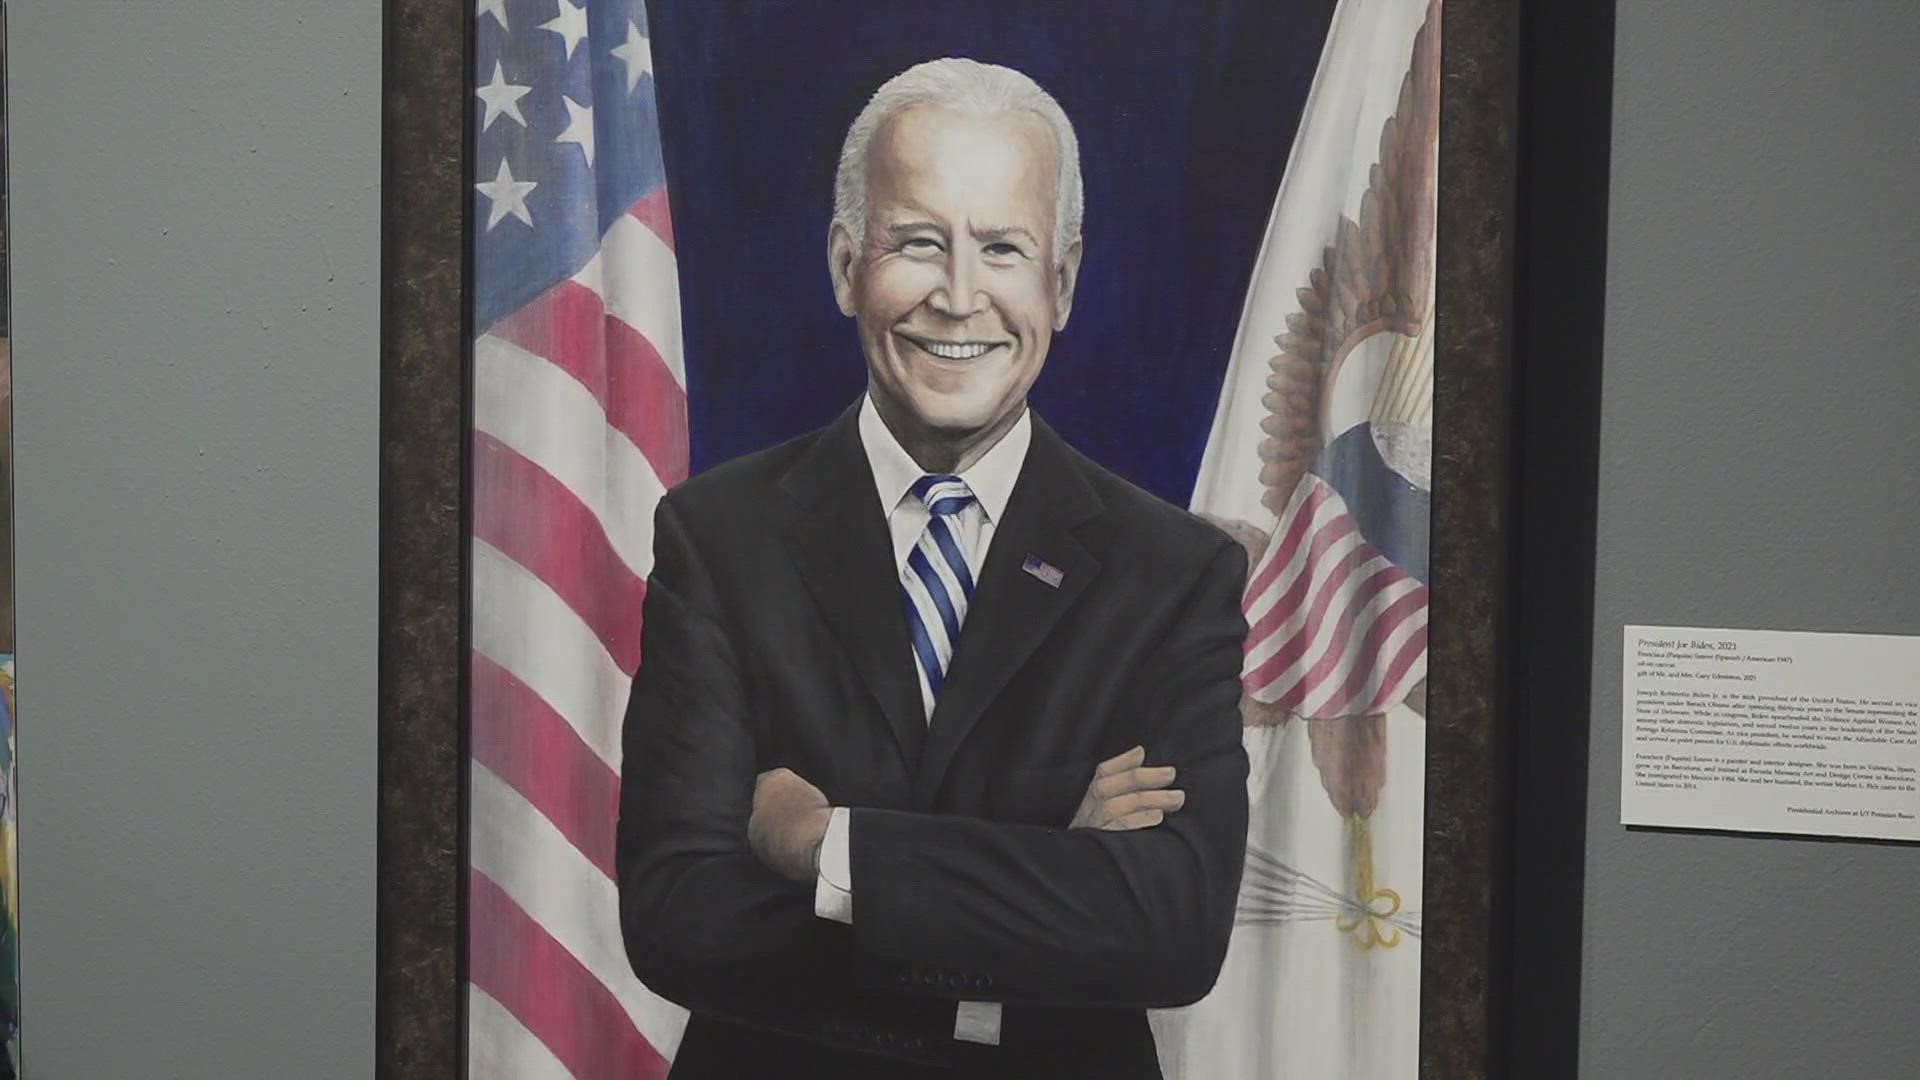 Biden's portrait joins the ranks of several other presidents' pictures that are on display at the UTPB Presidential Archives.